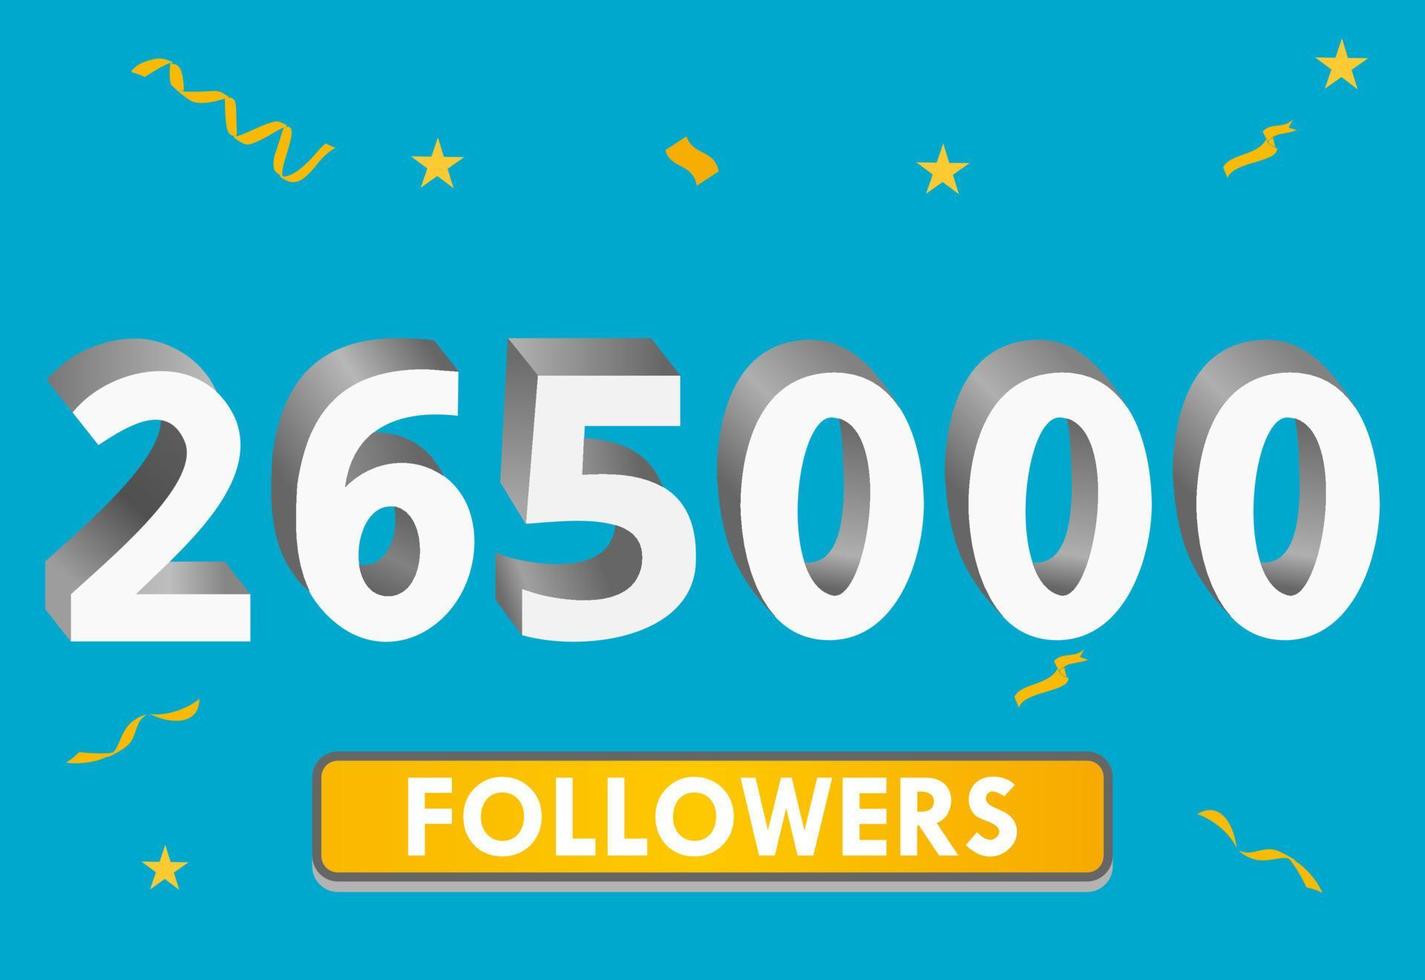 Illustration 3d numbers for social media 265k likes thanks, celebrating subscribers fans. Banner with 265000 followers vector